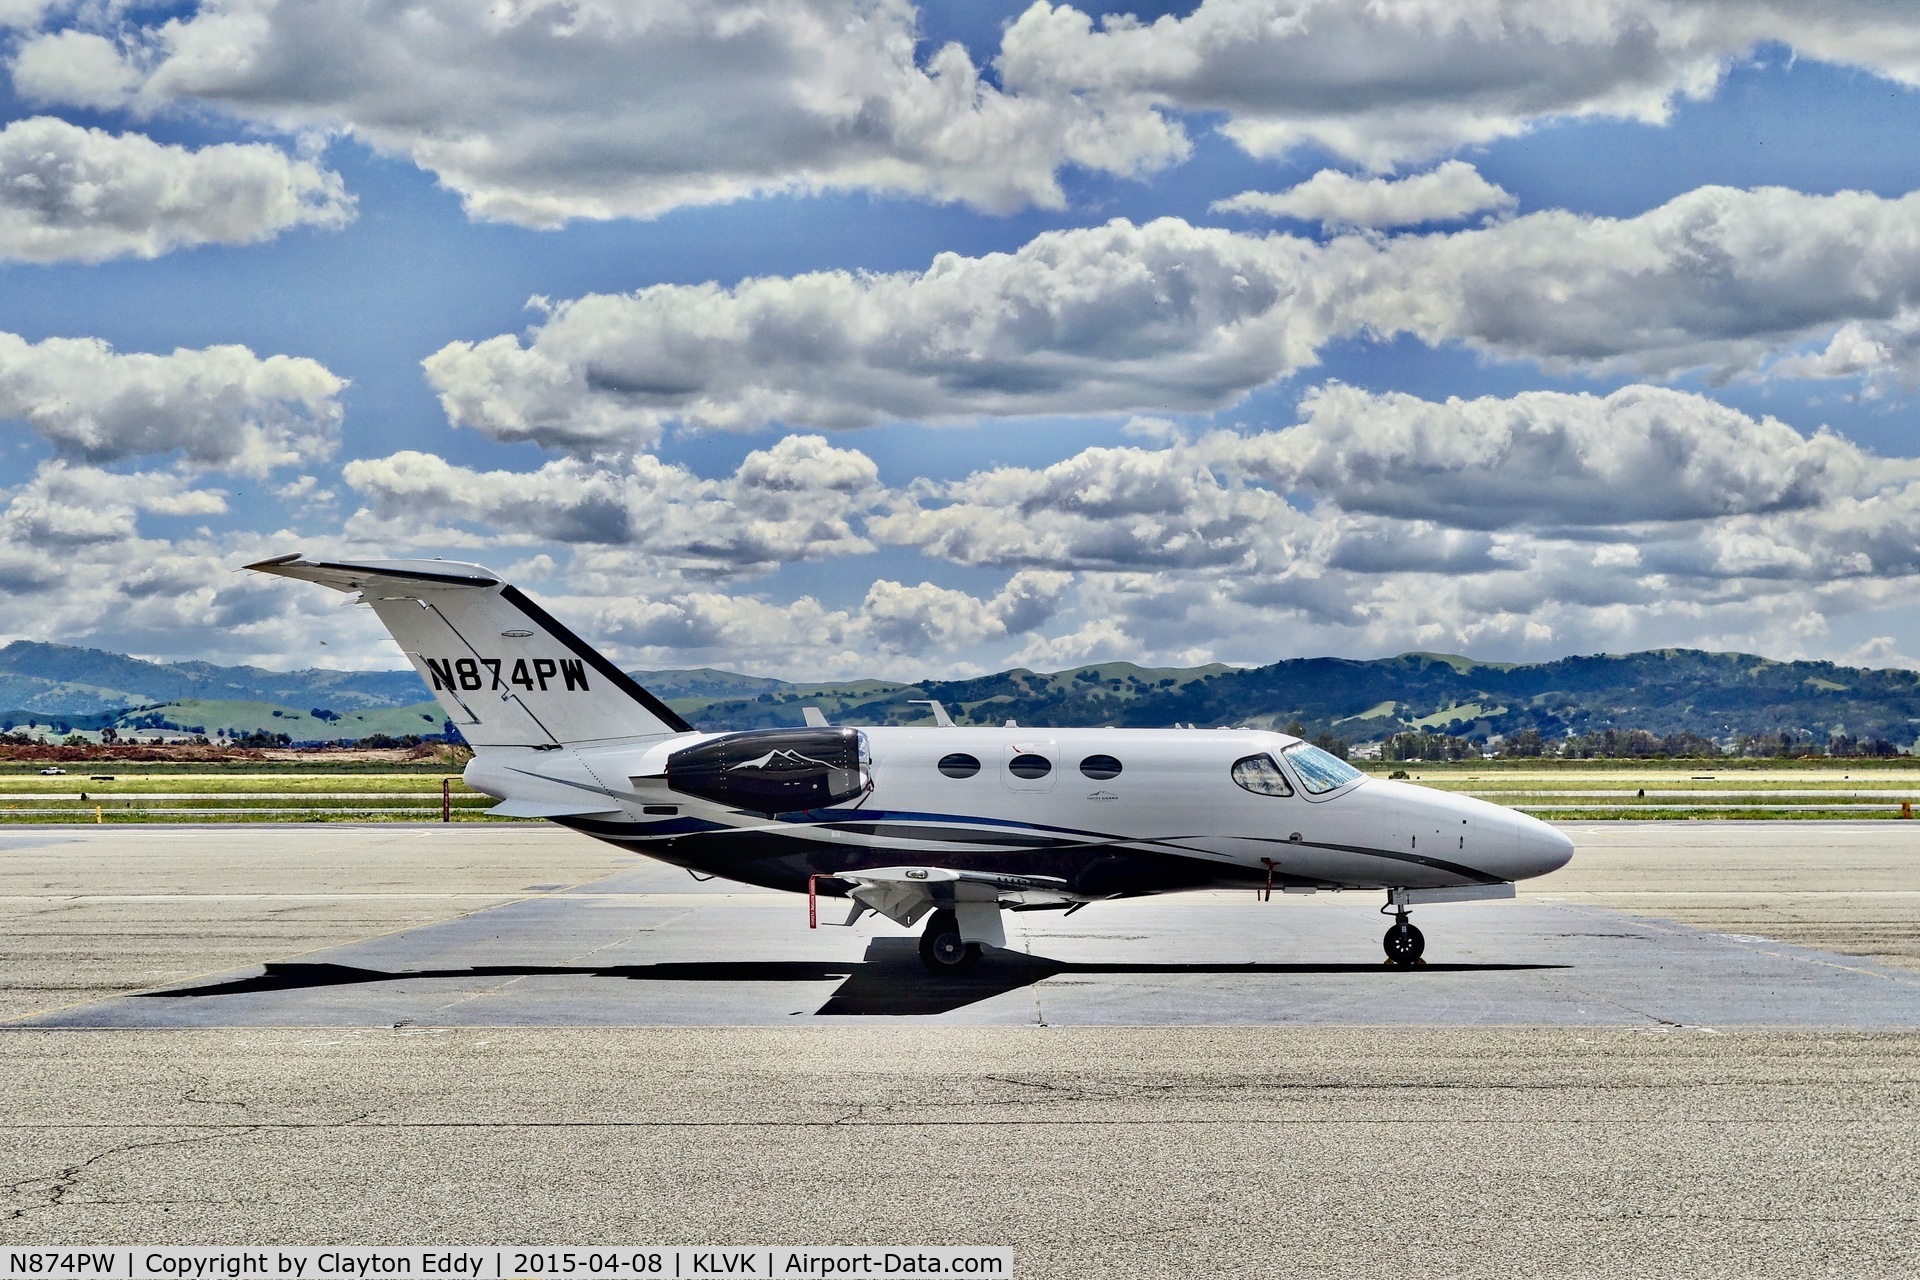 N874PW, 2011 Cessna 510 Citation Mustang Citation Mustang C/N 510-0392, Livermore Airport California 2015.